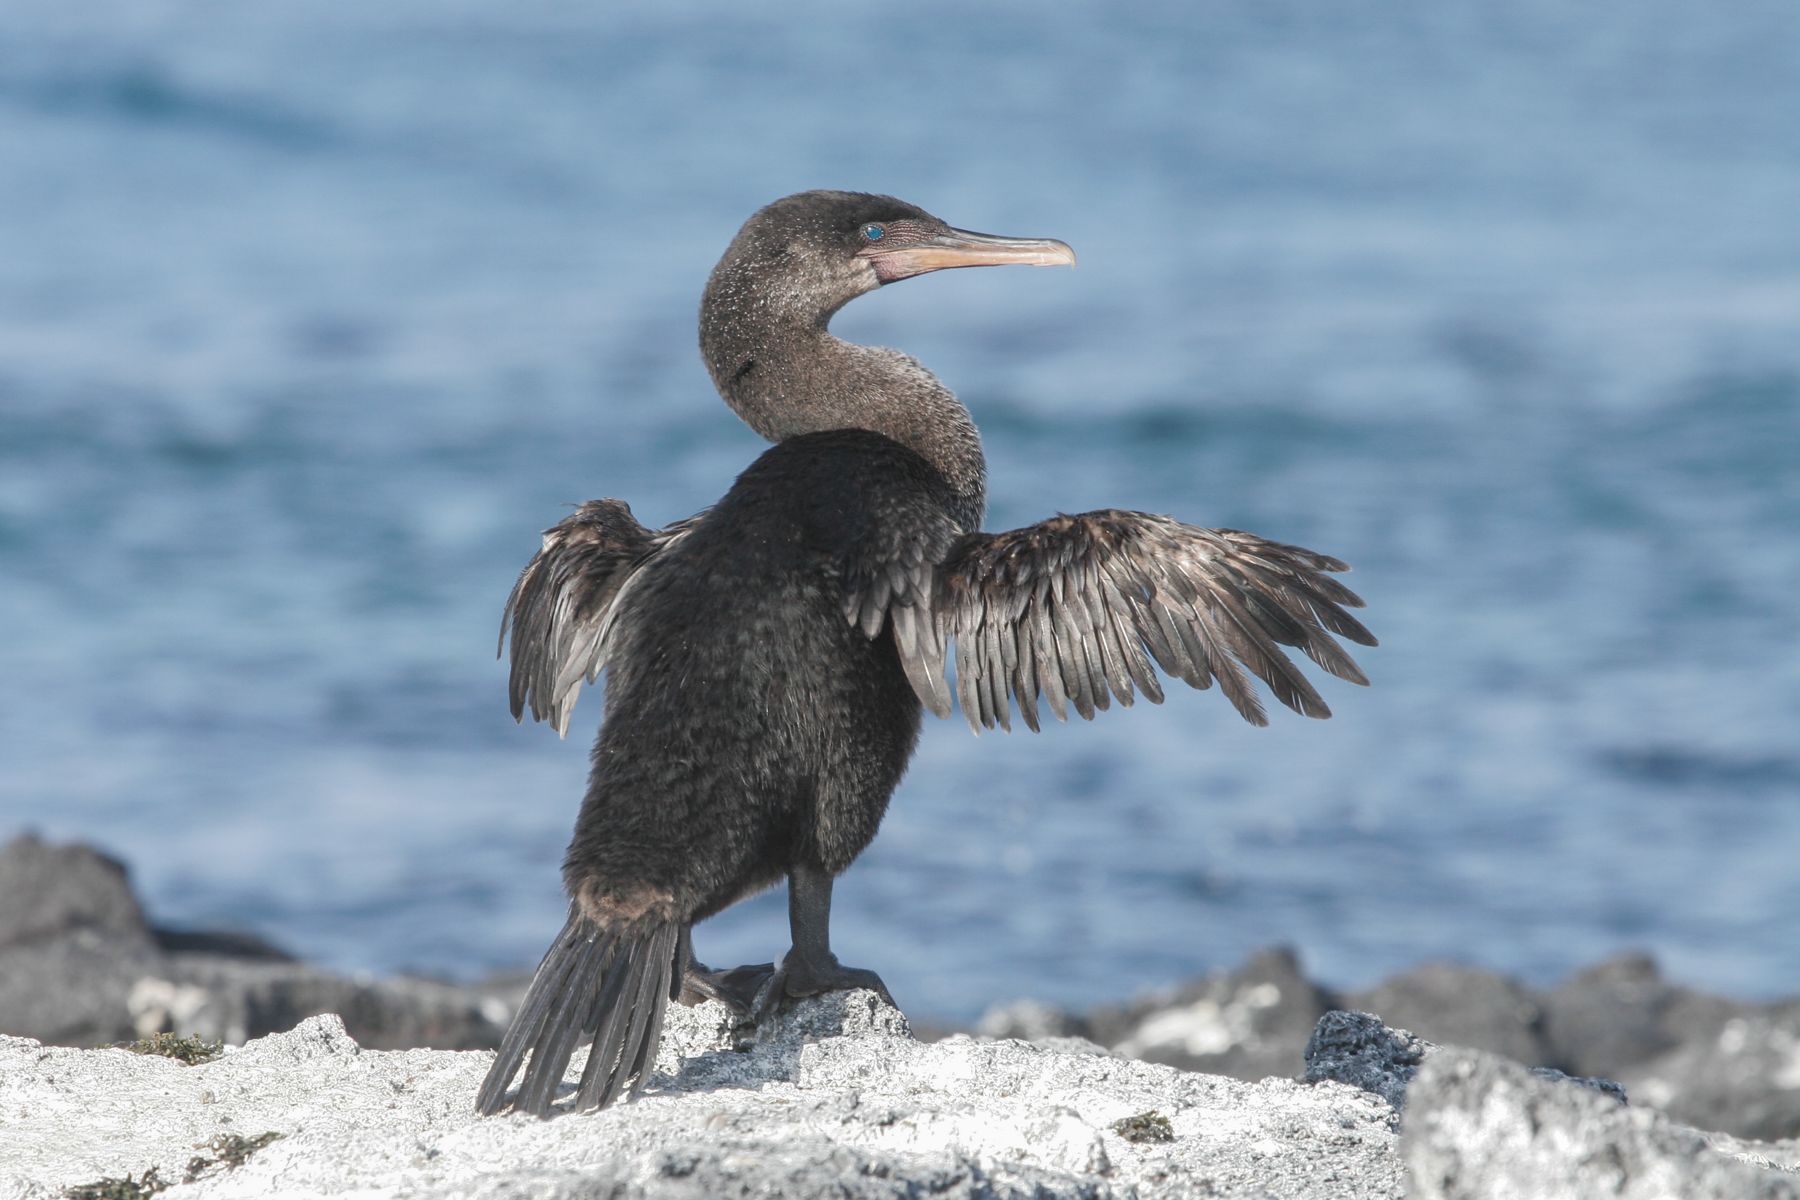 Even if you are a Flightless Cormorant, those stumpy little wings still have to be dried